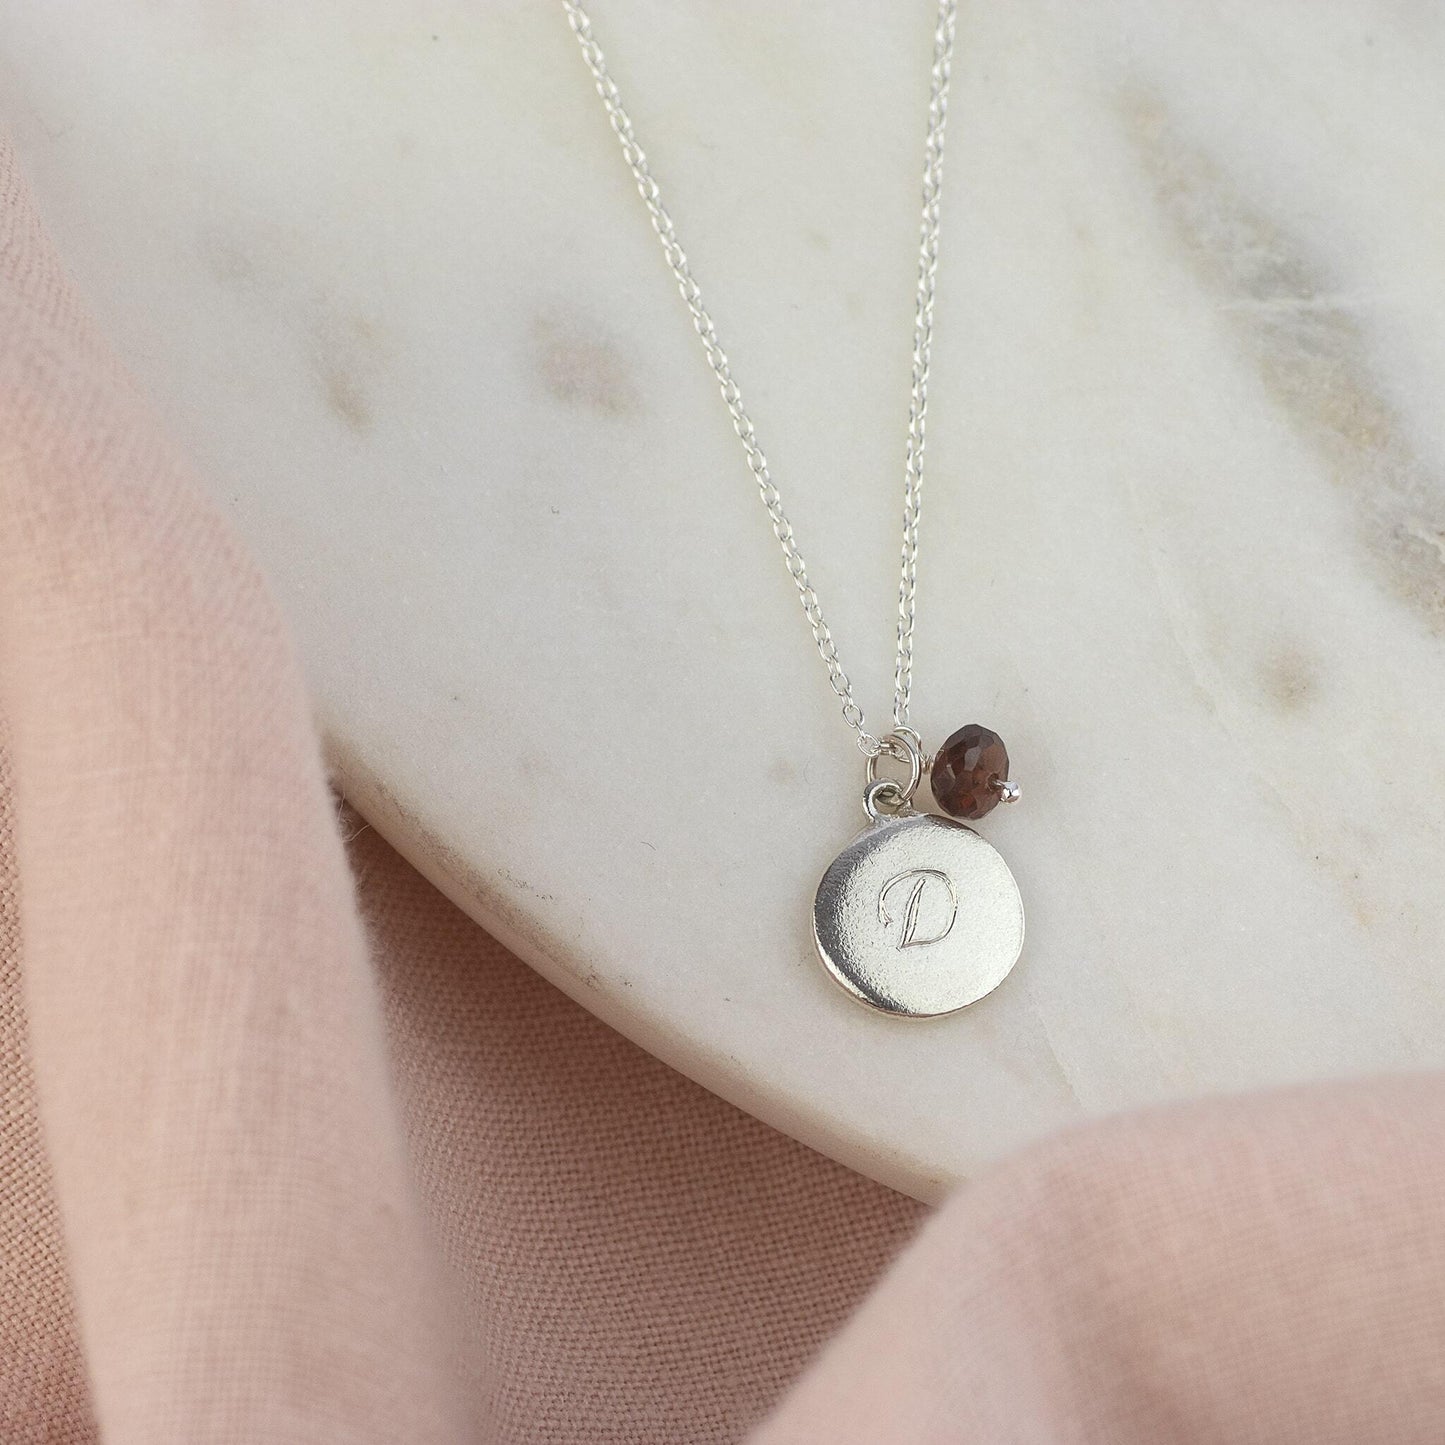 Birthday Gift for Her - Personalised Initial Pendant with Birthstone